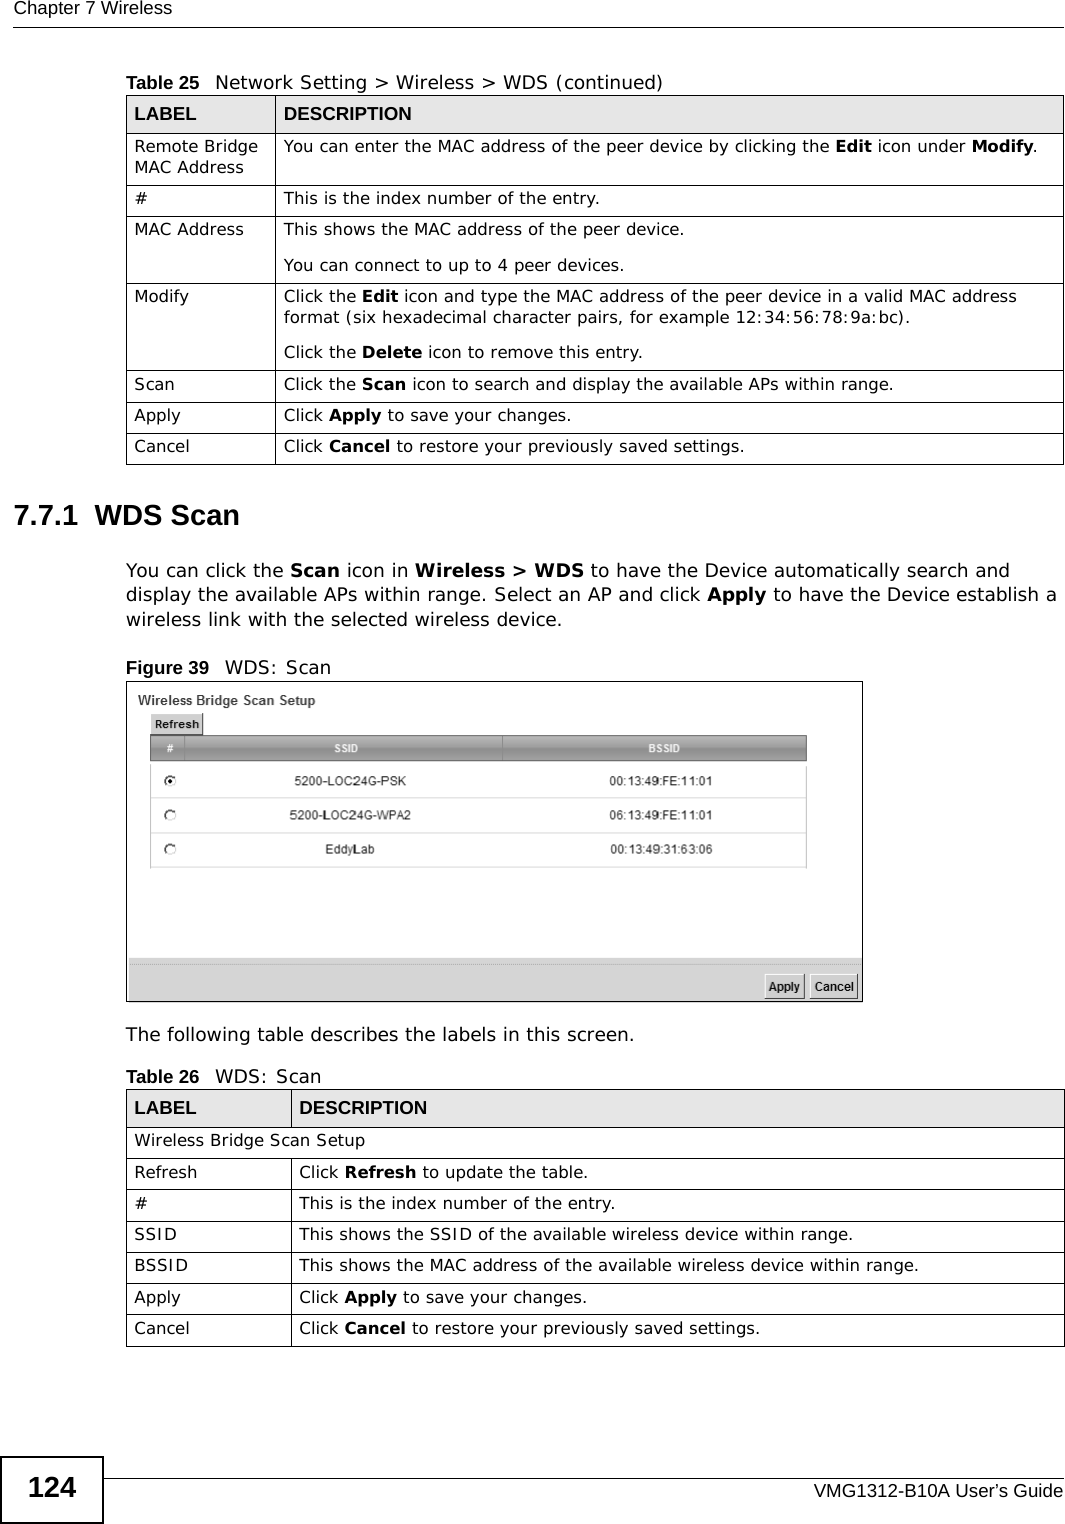 Chapter 7 WirelessVMG1312-B10A User’s Guide1247.7.1  WDS ScanYou can click the Scan icon in Wireless &gt; WDS to have the Device automatically search and display the available APs within range. Select an AP and click Apply to have the Device establish a wireless link with the selected wireless device. Figure 39   WDS: ScanThe following table describes the labels in this screen.Remote Bridge MAC Address You can enter the MAC address of the peer device by clicking the Edit icon under Modify. # This is the index number of the entry.MAC Address This shows the MAC address of the peer device. You can connect to up to 4 peer devices.Modify Click the Edit icon and type the MAC address of the peer device in a valid MAC address format (six hexadecimal character pairs, for example 12:34:56:78:9a:bc).Click the Delete icon to remove this entry.Scan Click the Scan icon to search and display the available APs within range.Apply Click Apply to save your changes.Cancel Click Cancel to restore your previously saved settings.Table 25   Network Setting &gt; Wireless &gt; WDS (continued)LABEL DESCRIPTIONTable 26   WDS: ScanLABEL DESCRIPTIONWireless Bridge Scan SetupRefresh Click Refresh to update the table. # This is the index number of the entry.SSID This shows the SSID of the available wireless device within range.BSSID This shows the MAC address of the available wireless device within range.Apply Click Apply to save your changes.Cancel Click Cancel to restore your previously saved settings.